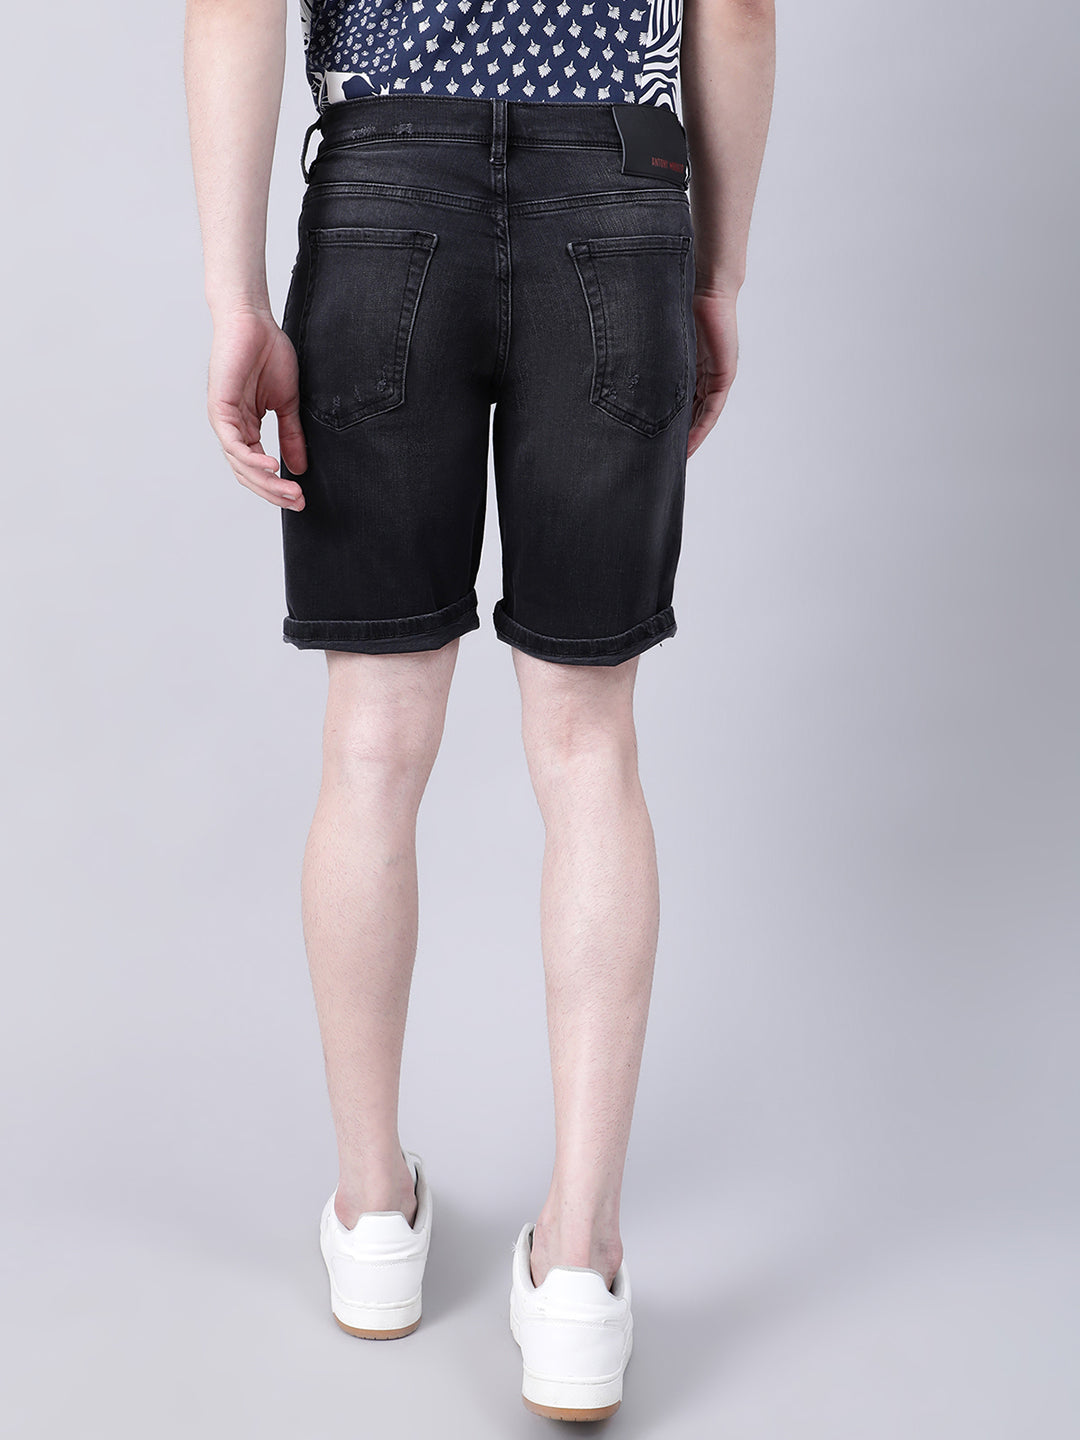 Mens Denim Ripped Jeans Shorts, Size: 30 to 36 at Rs 400 in New Delhi | ID:  20166792055